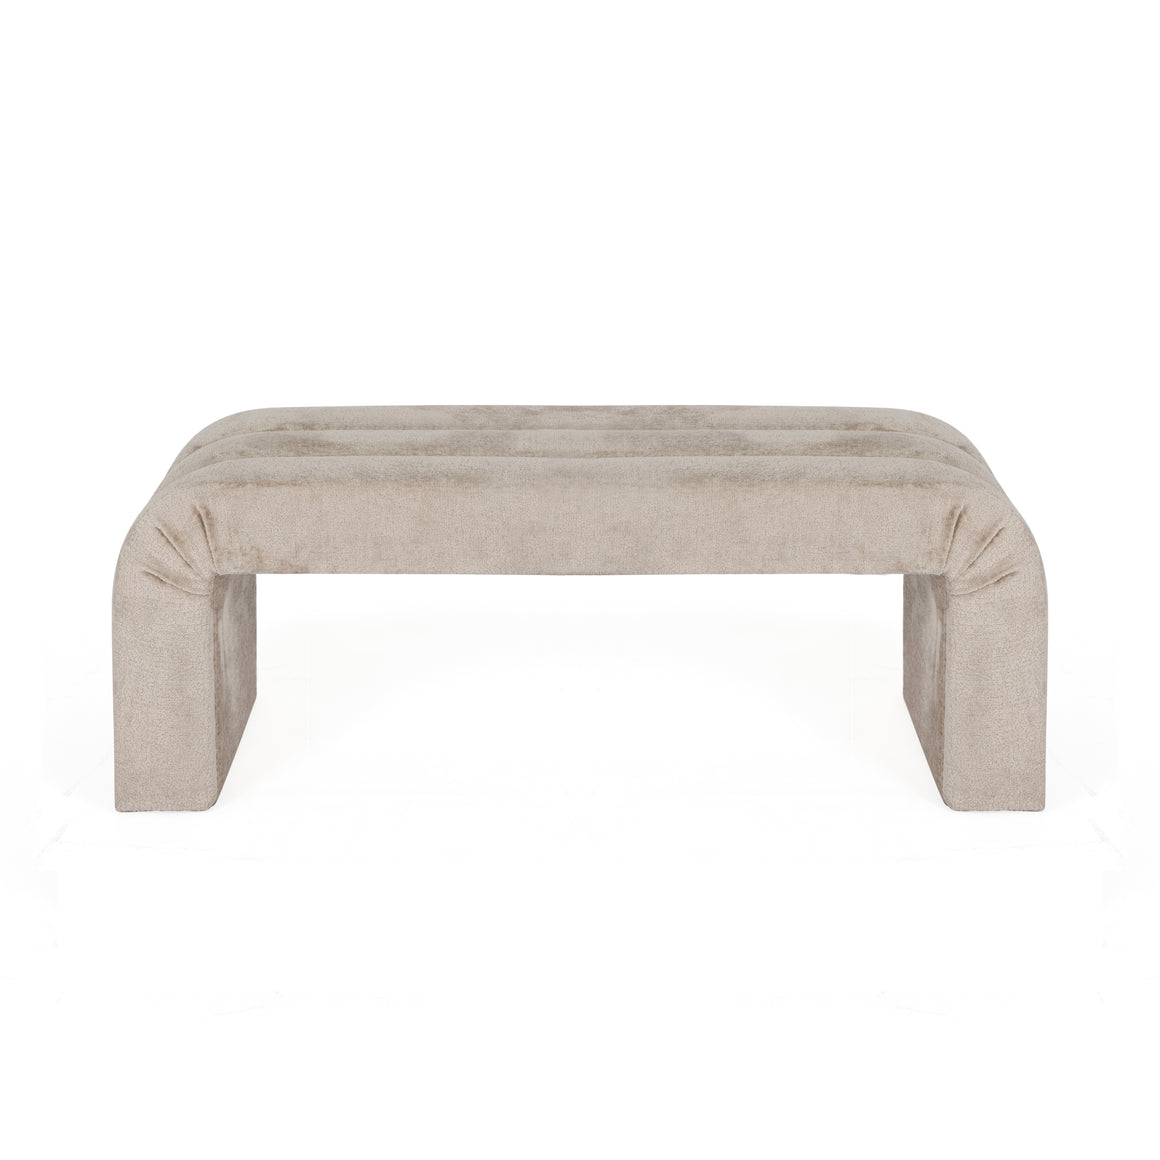 Mercer Horizontal Channeled Bench in Taupe Textured Chenille